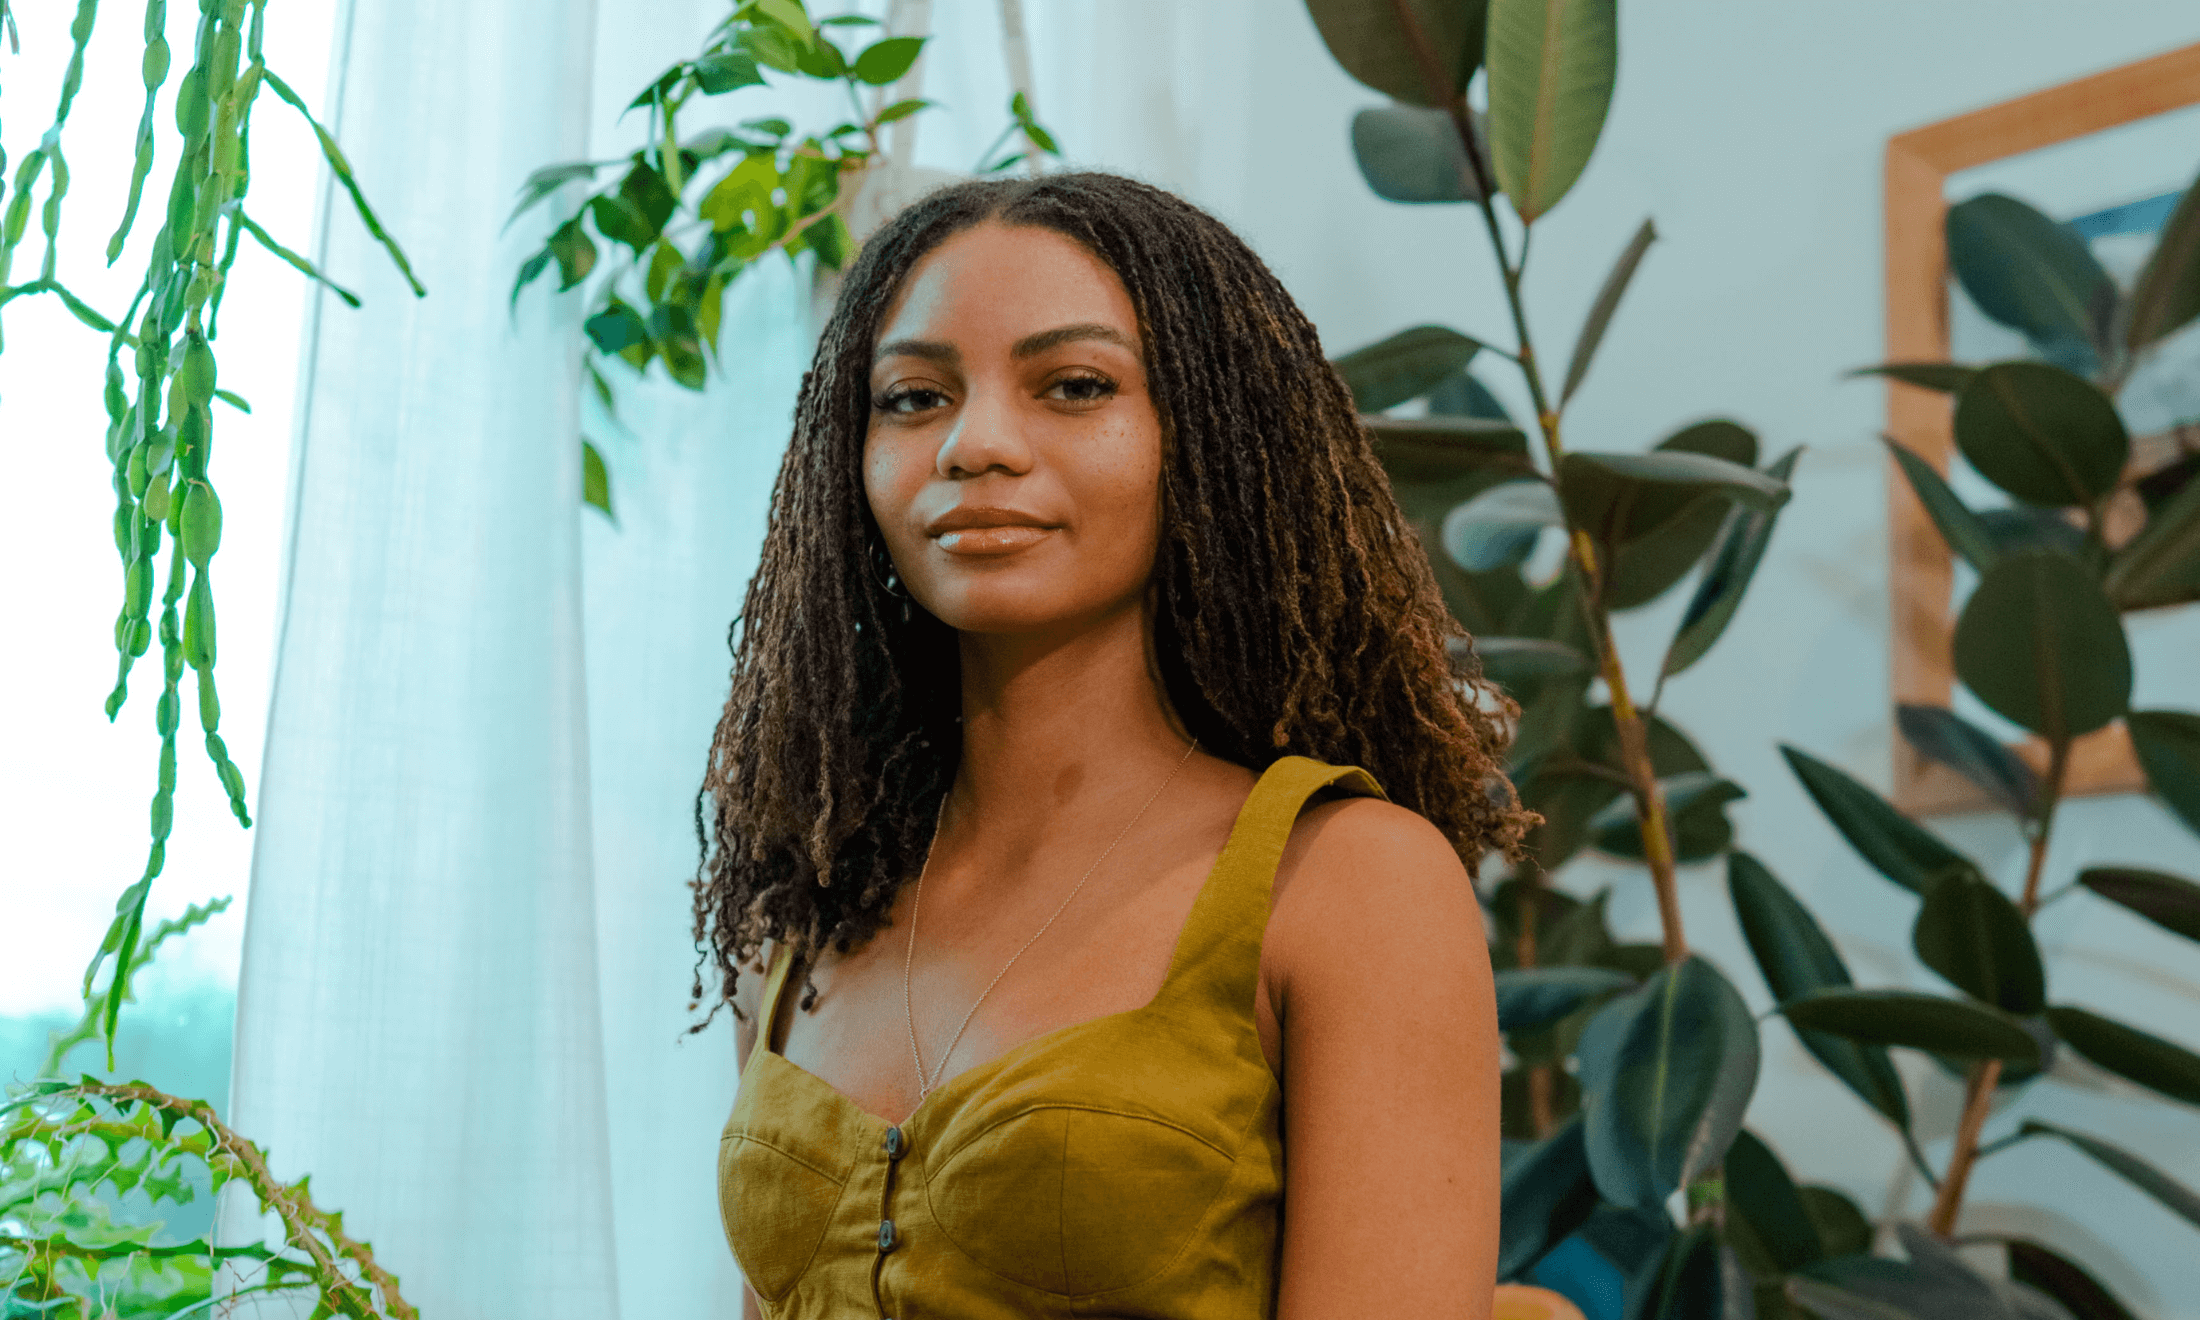 Leah Thomas is building a generation of intersectional environmentalists